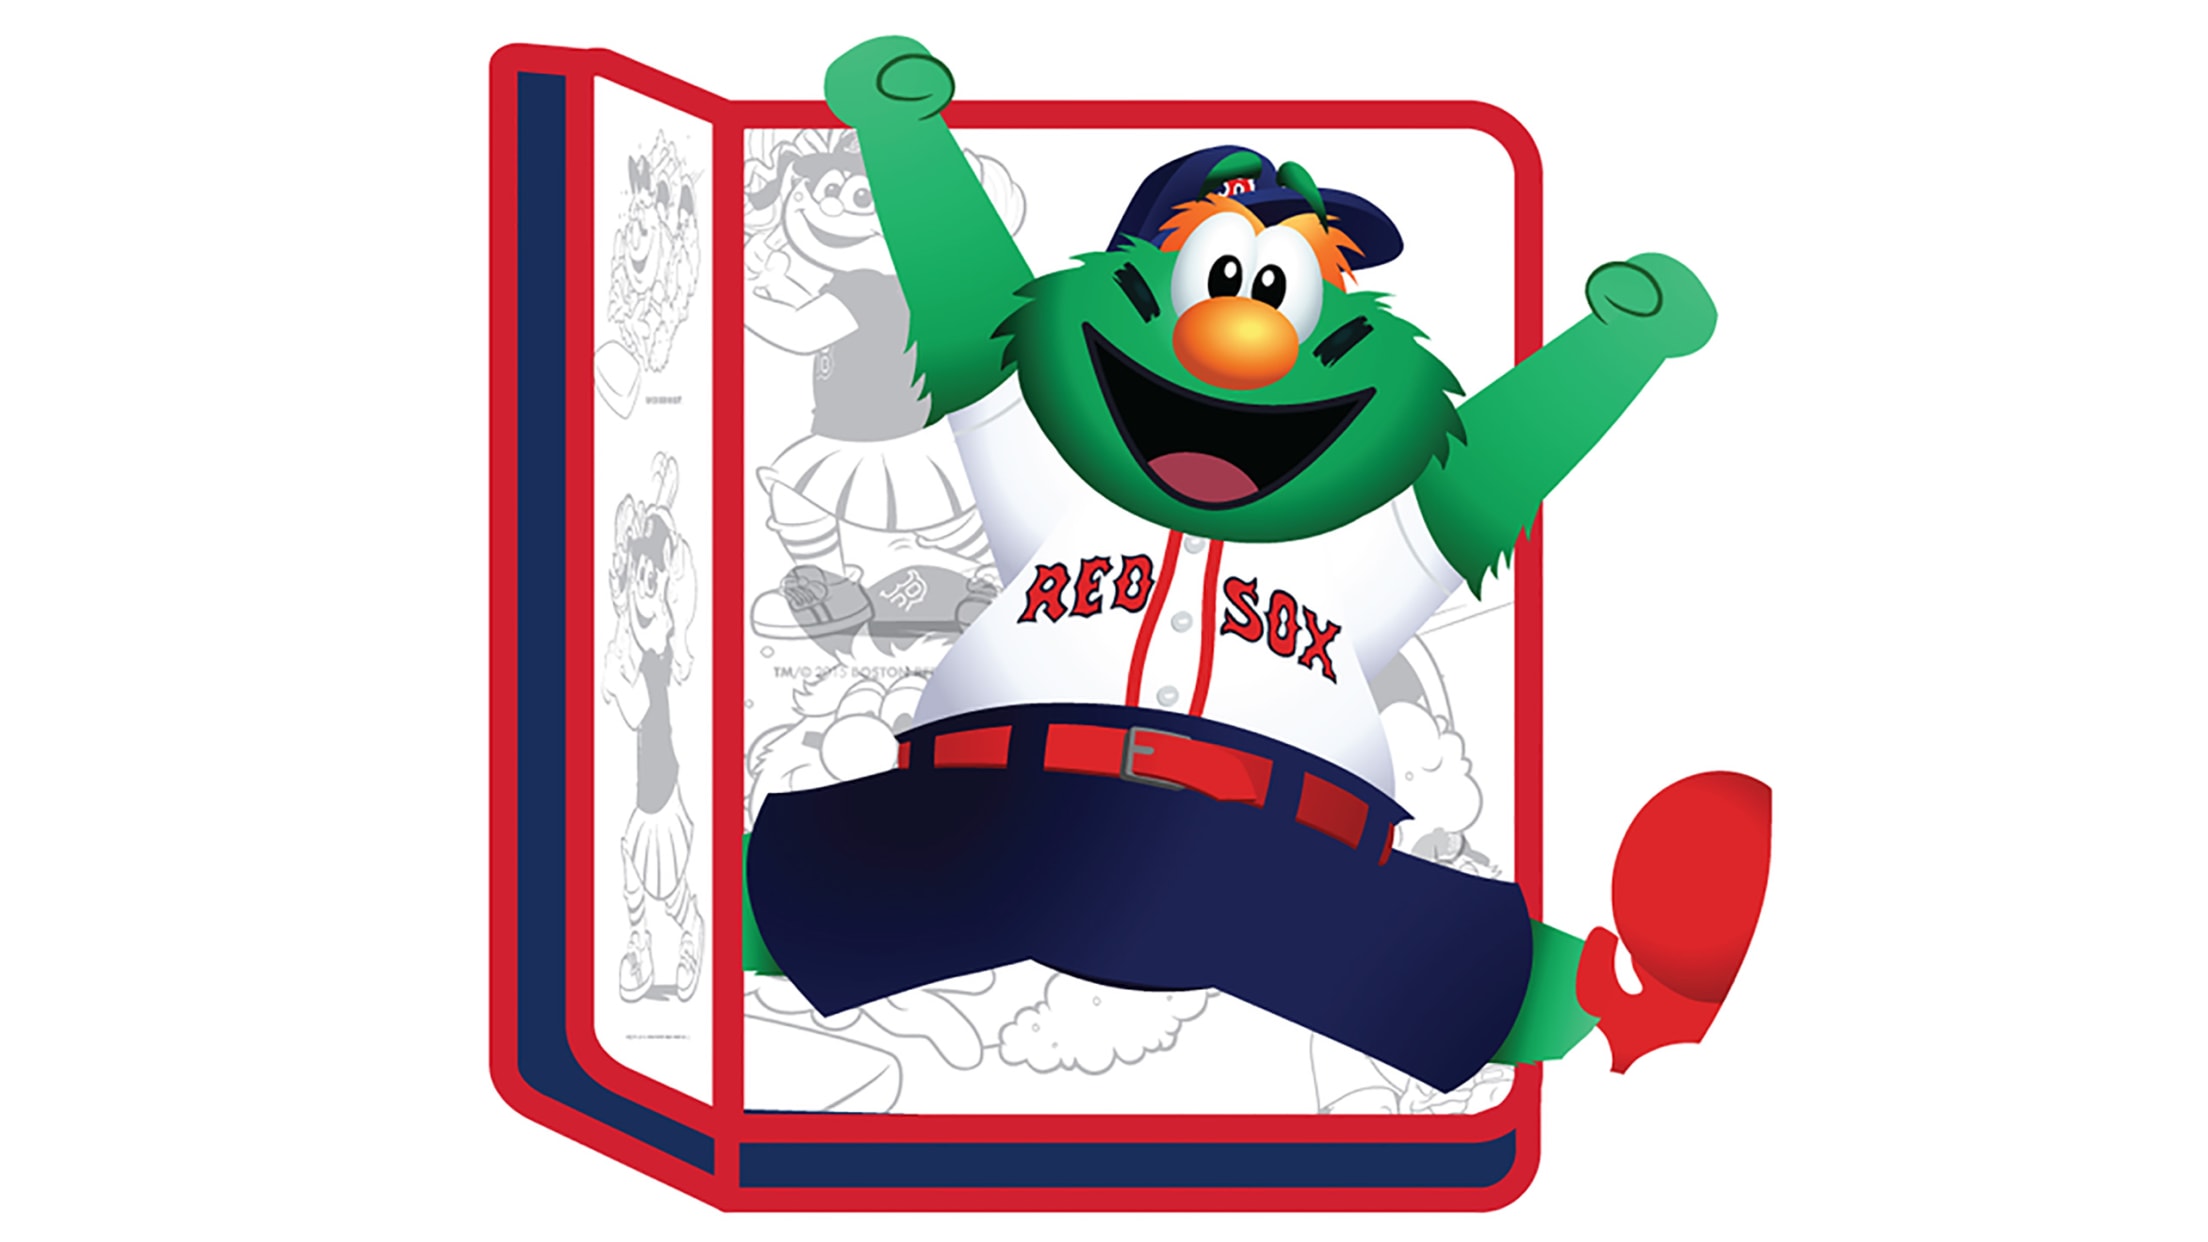 RedSox TeamStore on X: It's Red Sox Giveaway Day! The first KIDS to come  into Fenway Park this afternoon get a FREE Wally the Green Monster Pillow!  Make sure you use the